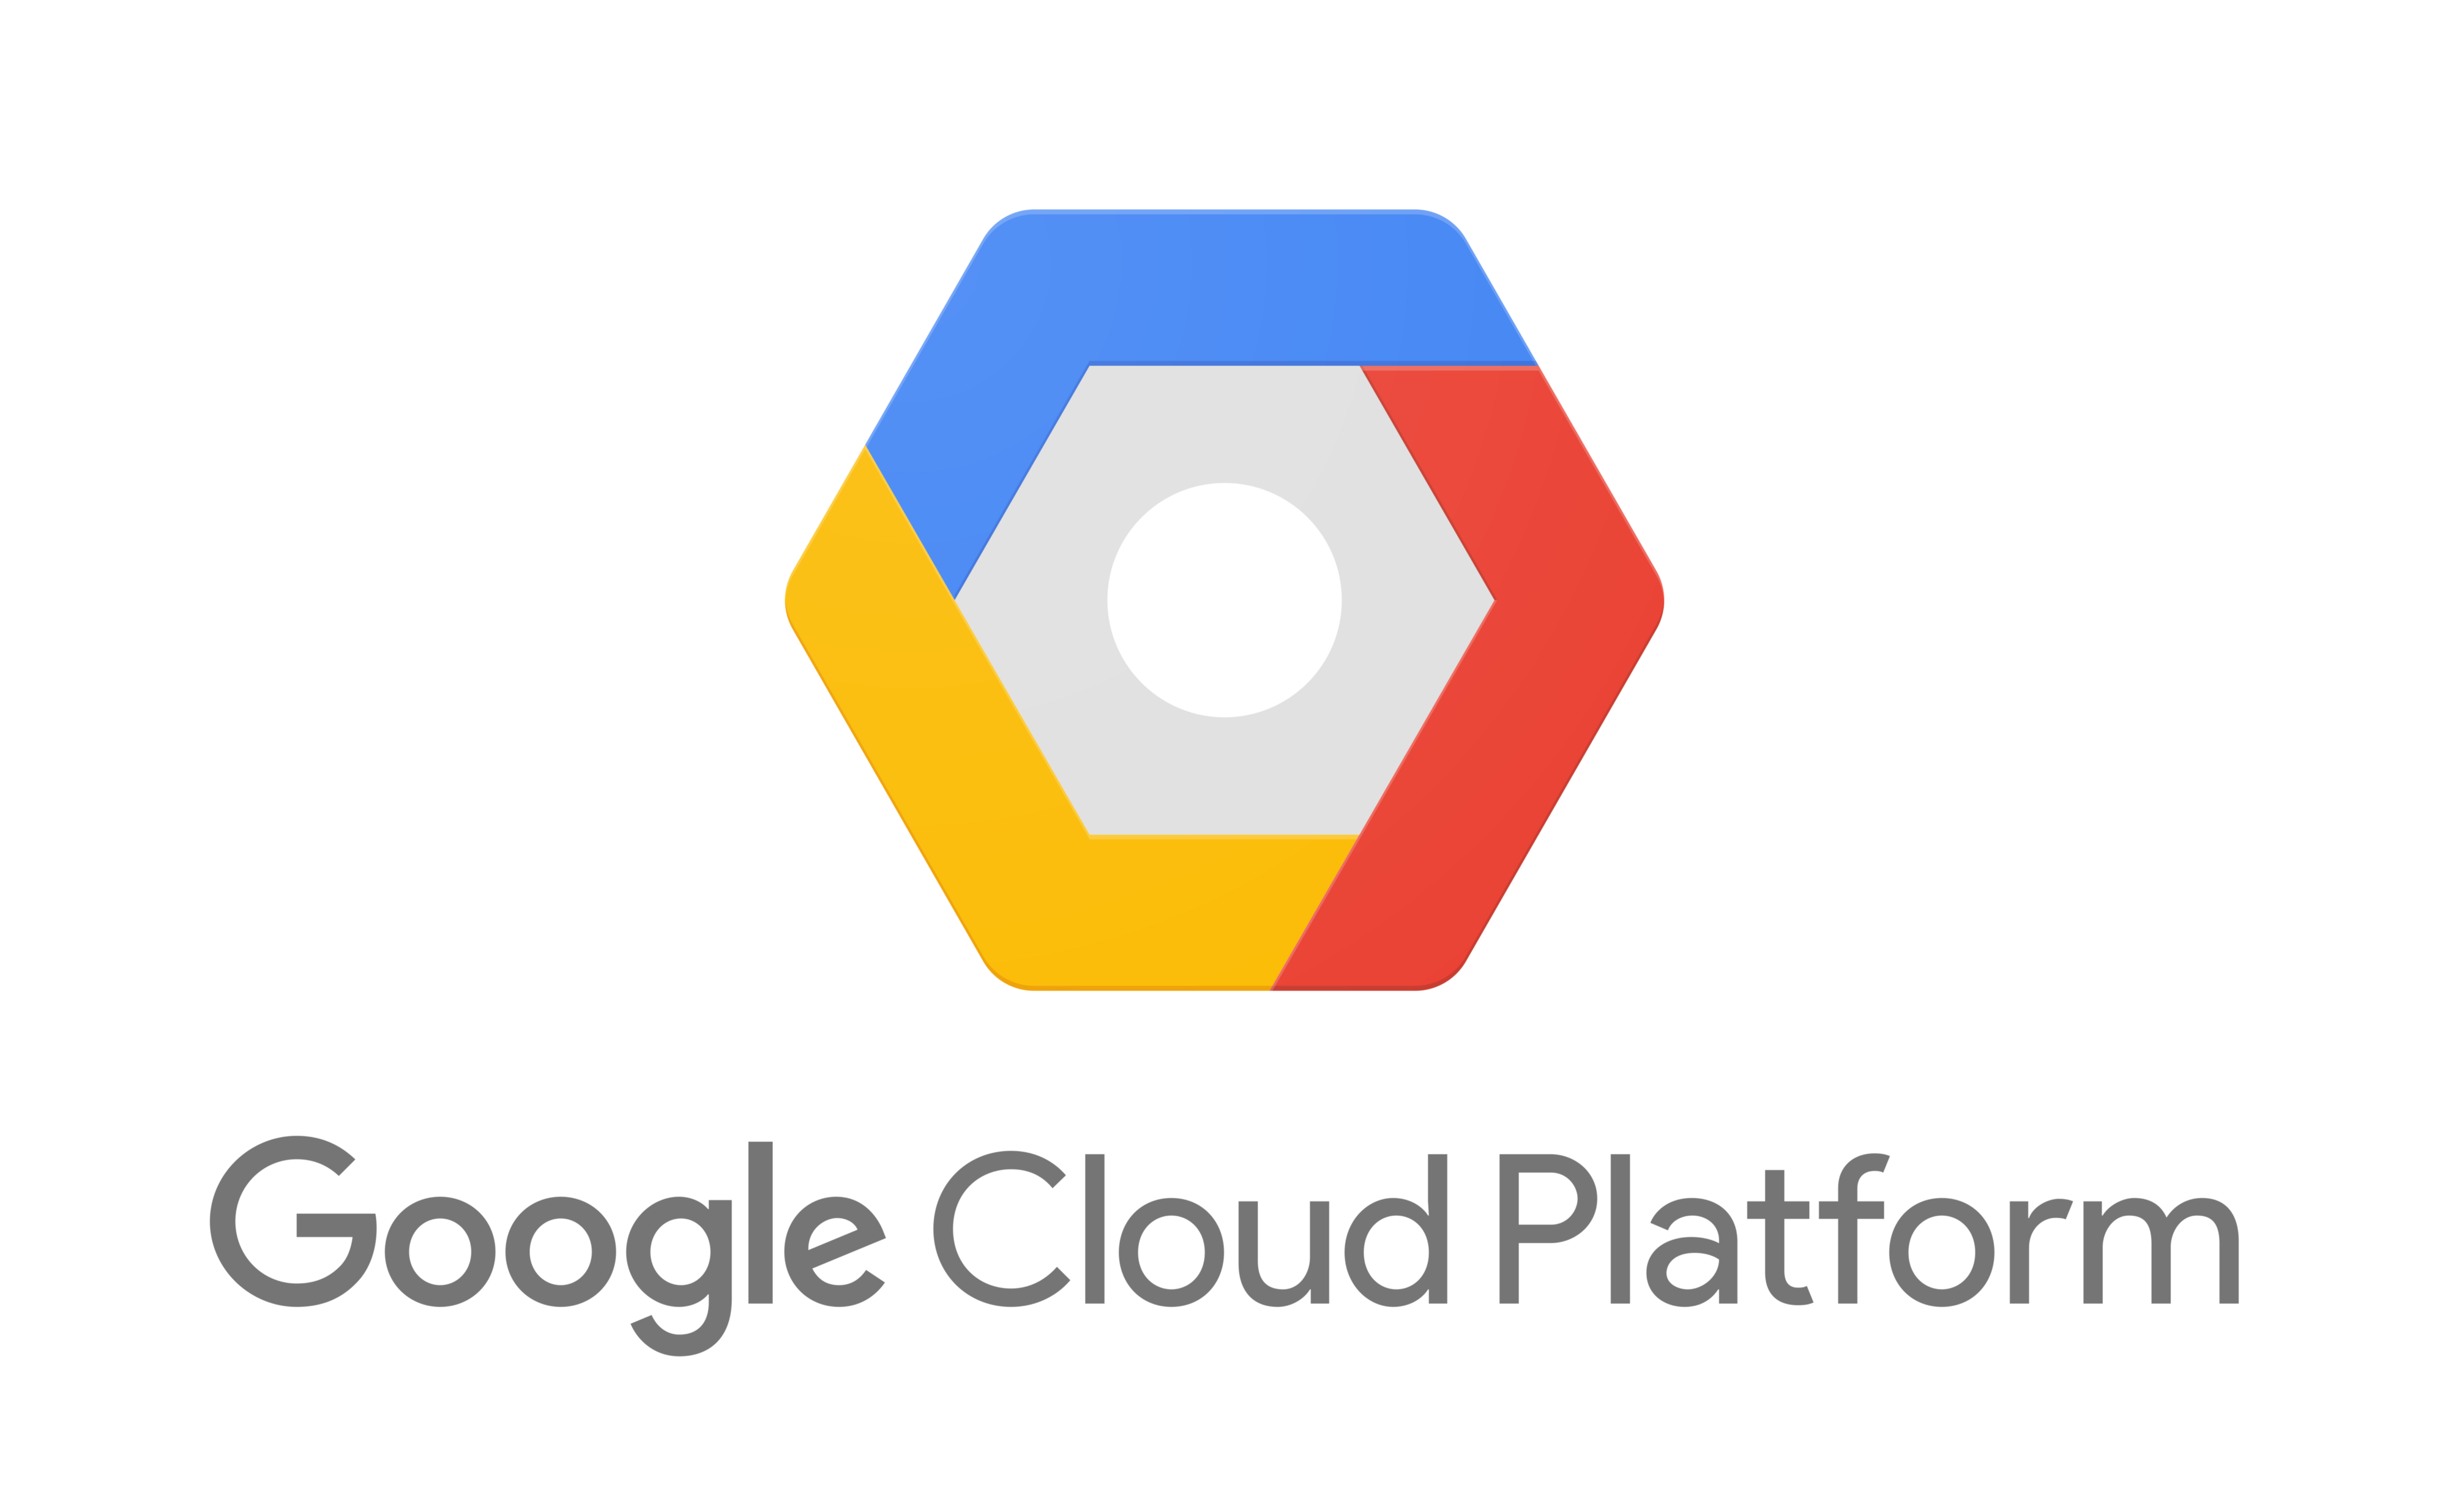 How To Set Chrome Rdp For Google Cloud In Full Screen Mode